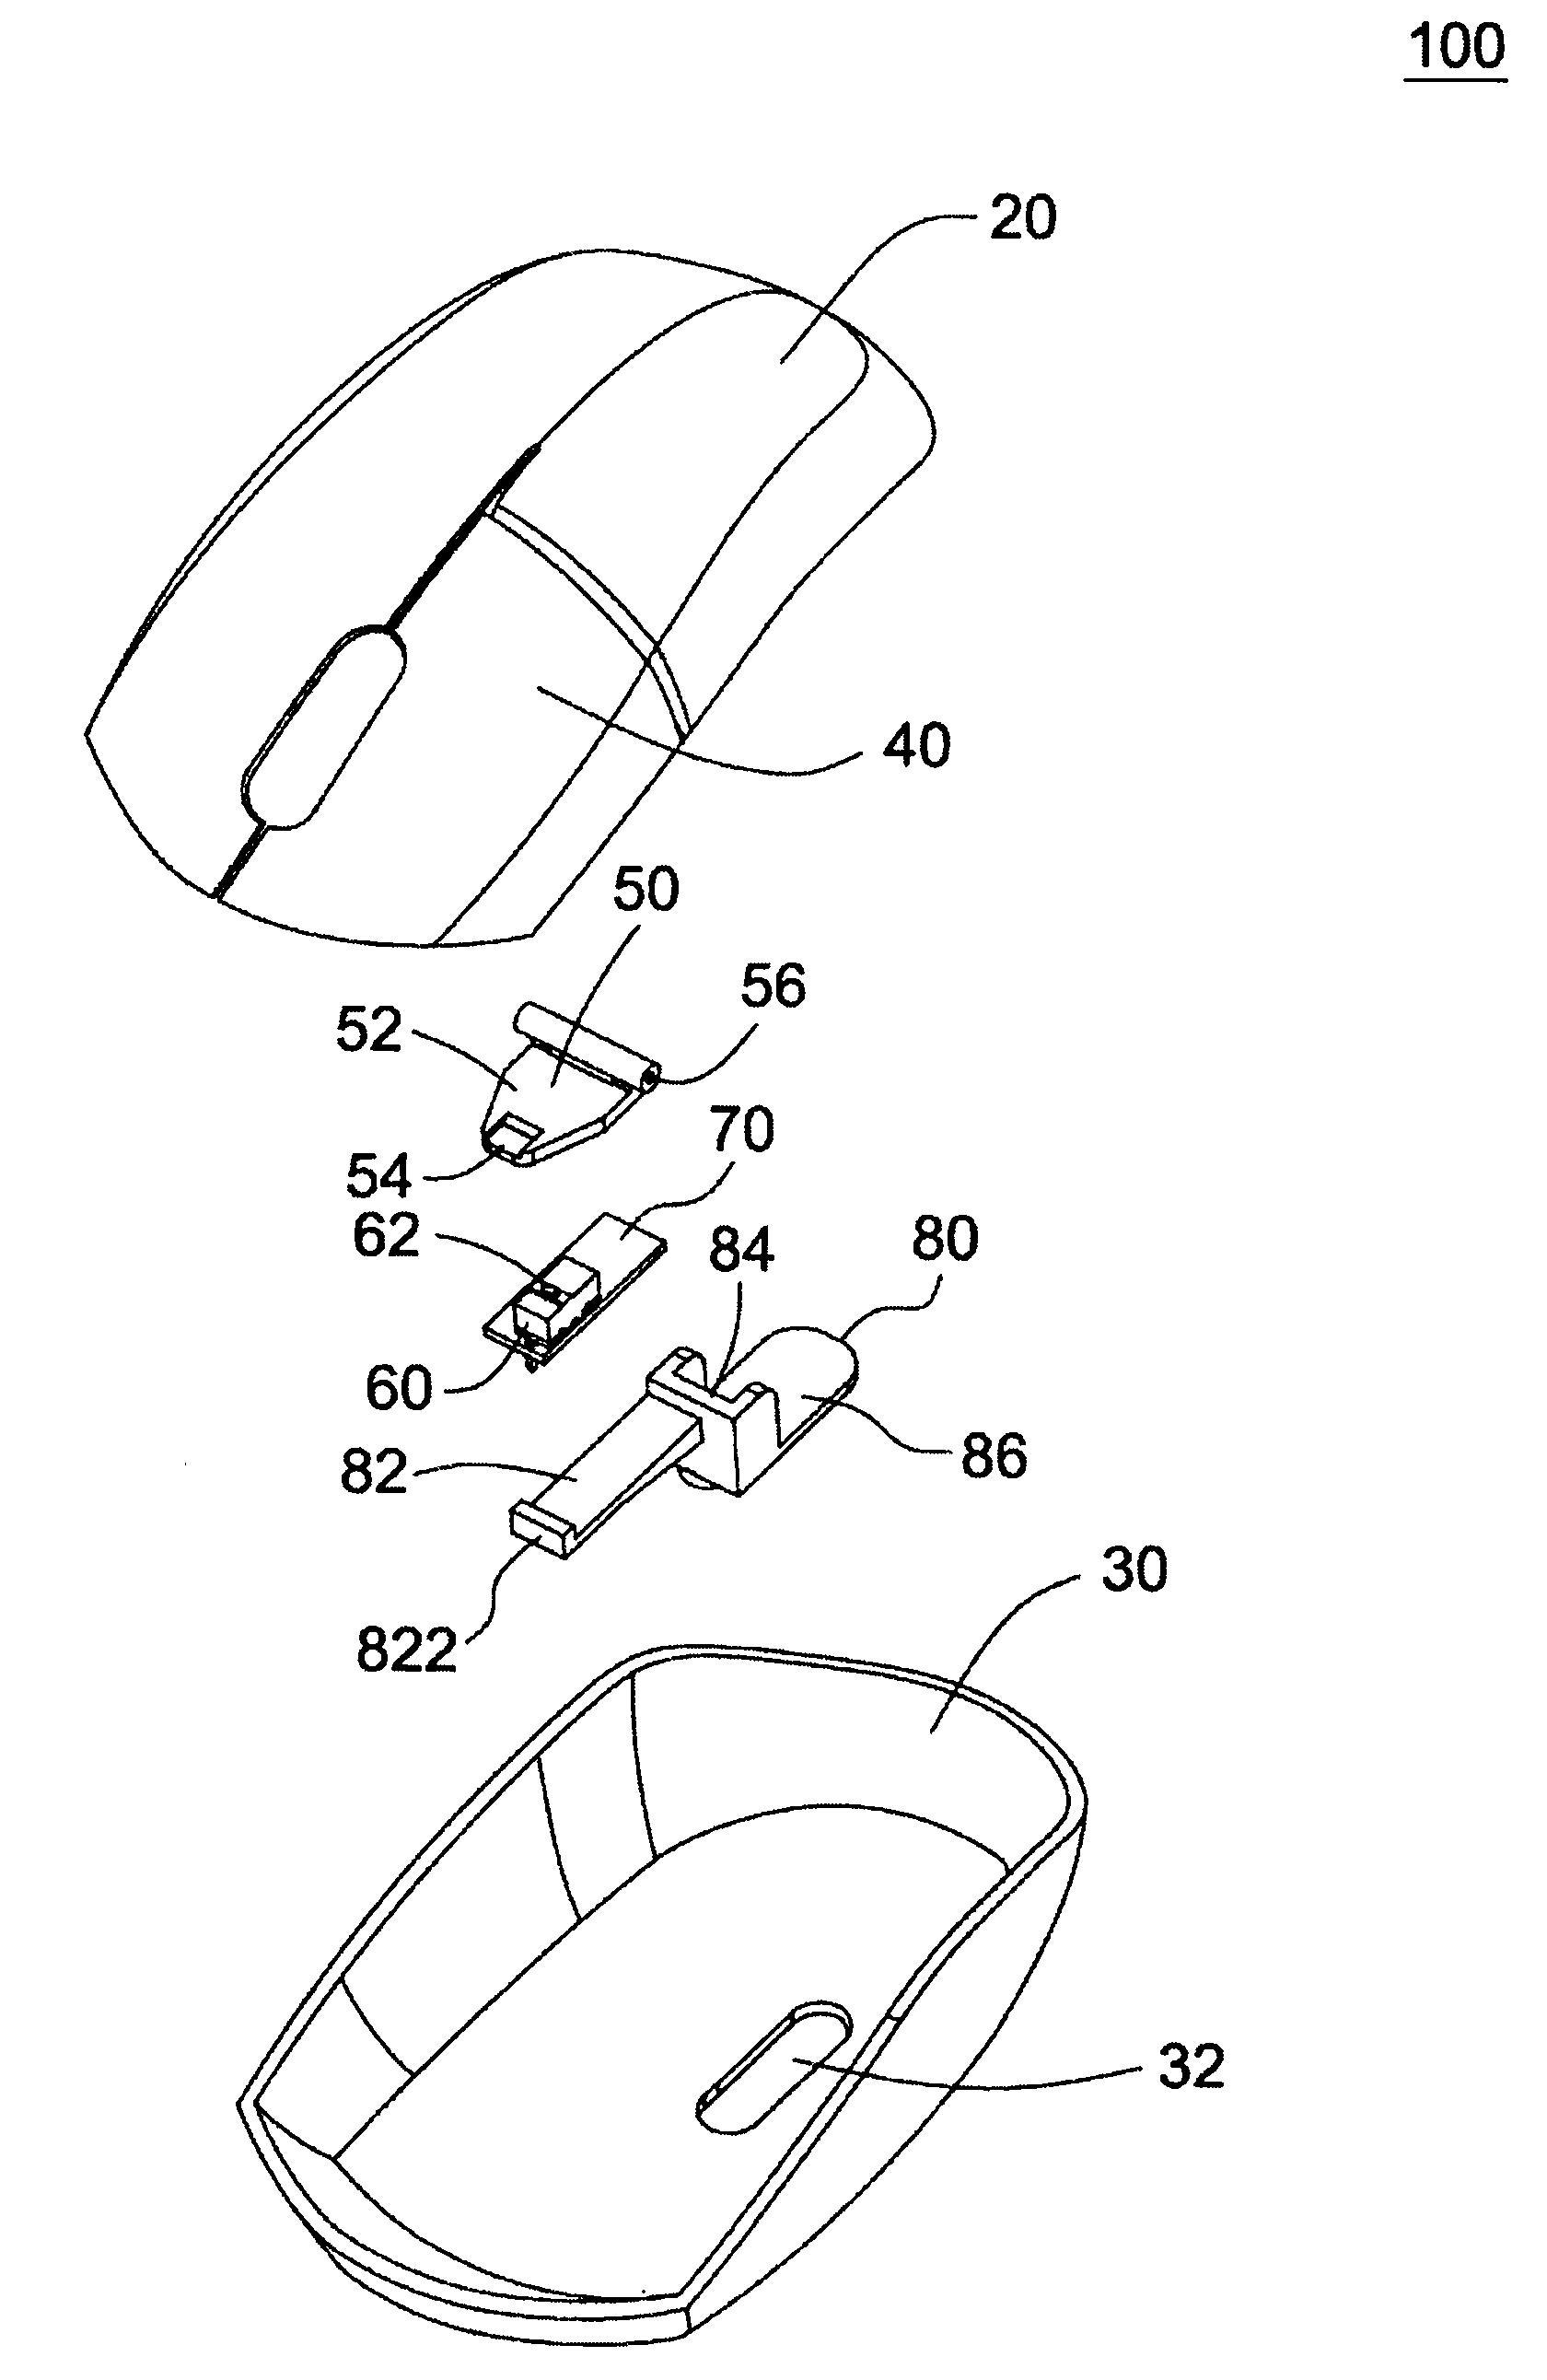 Mouse with adjustable key pressing force